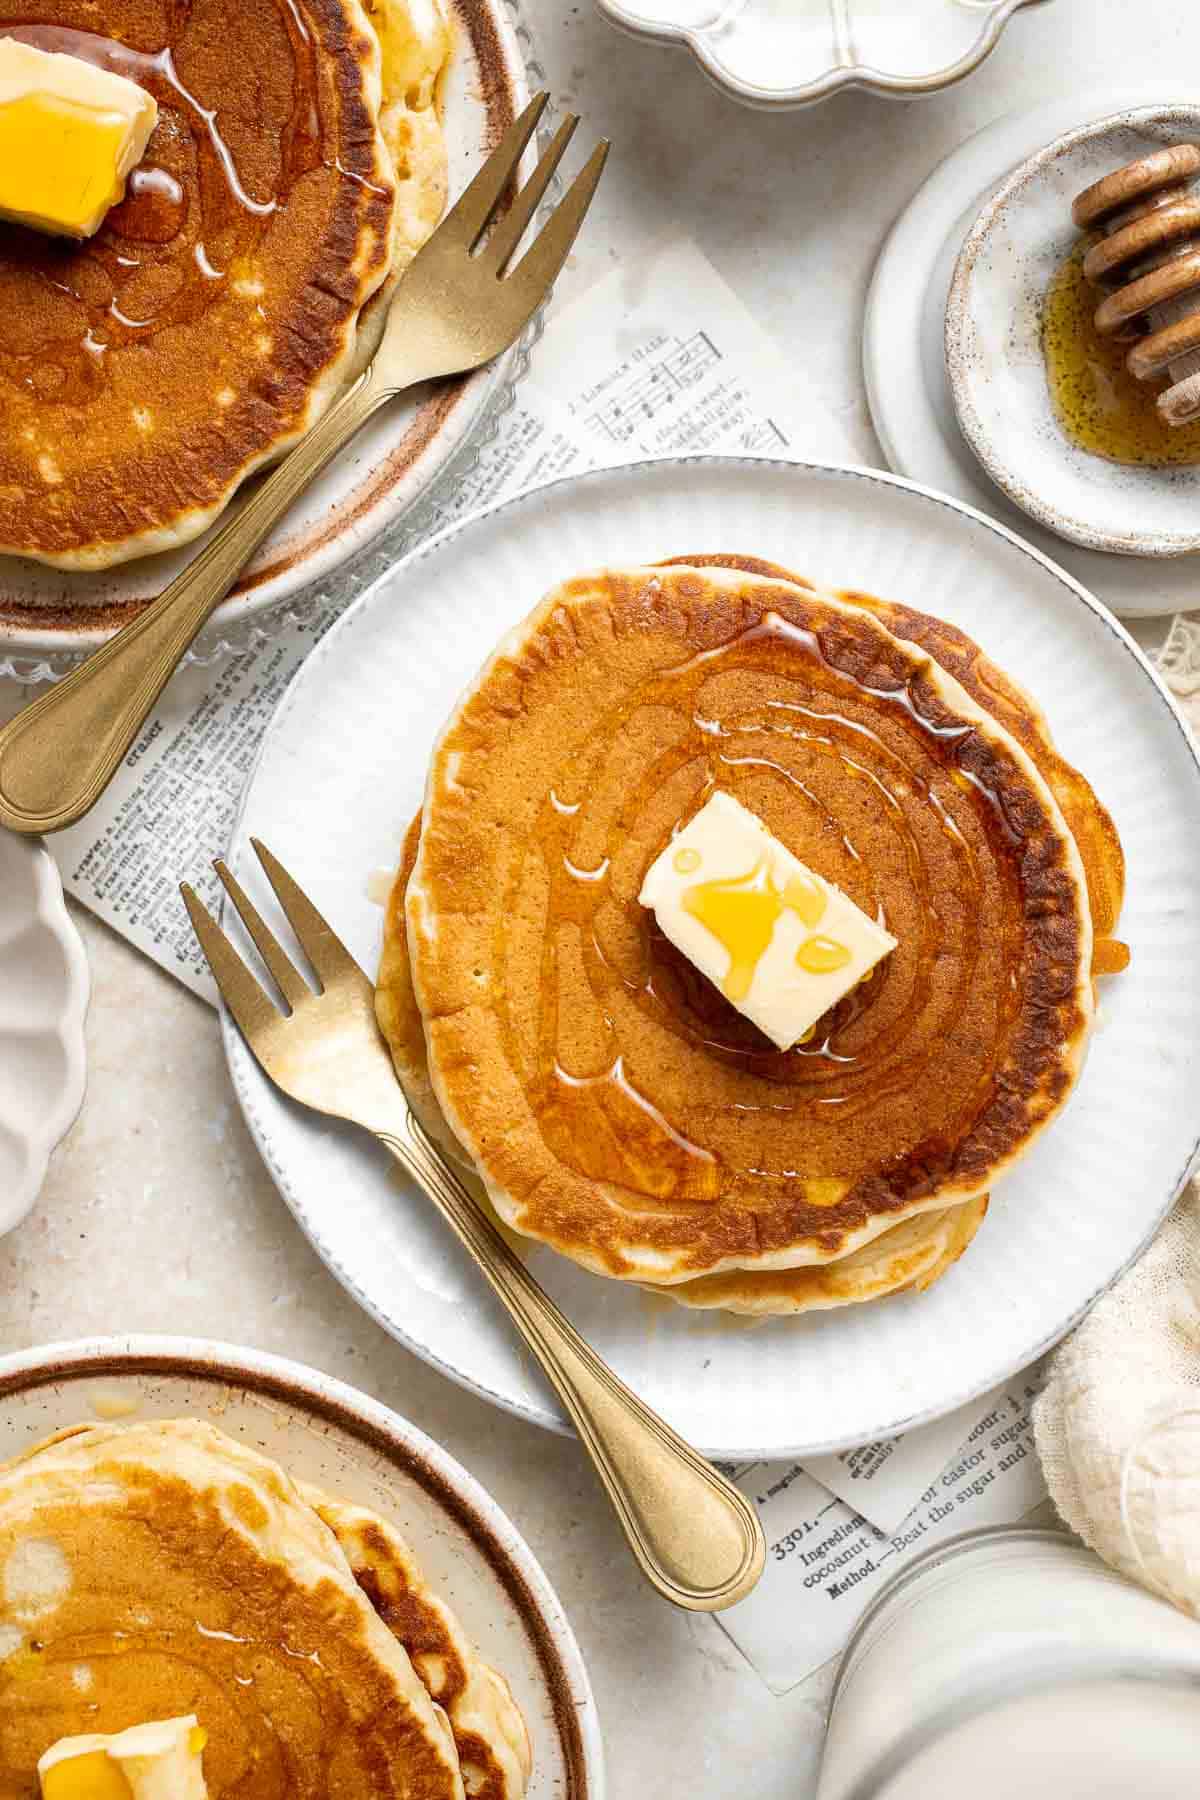 The Best Old Fashioned Pancakes are soft, tender, fluffy, and so easy to make. Ready in 15 minutes and perfect for lazy Sunday mornings! | aheadofthyme.com